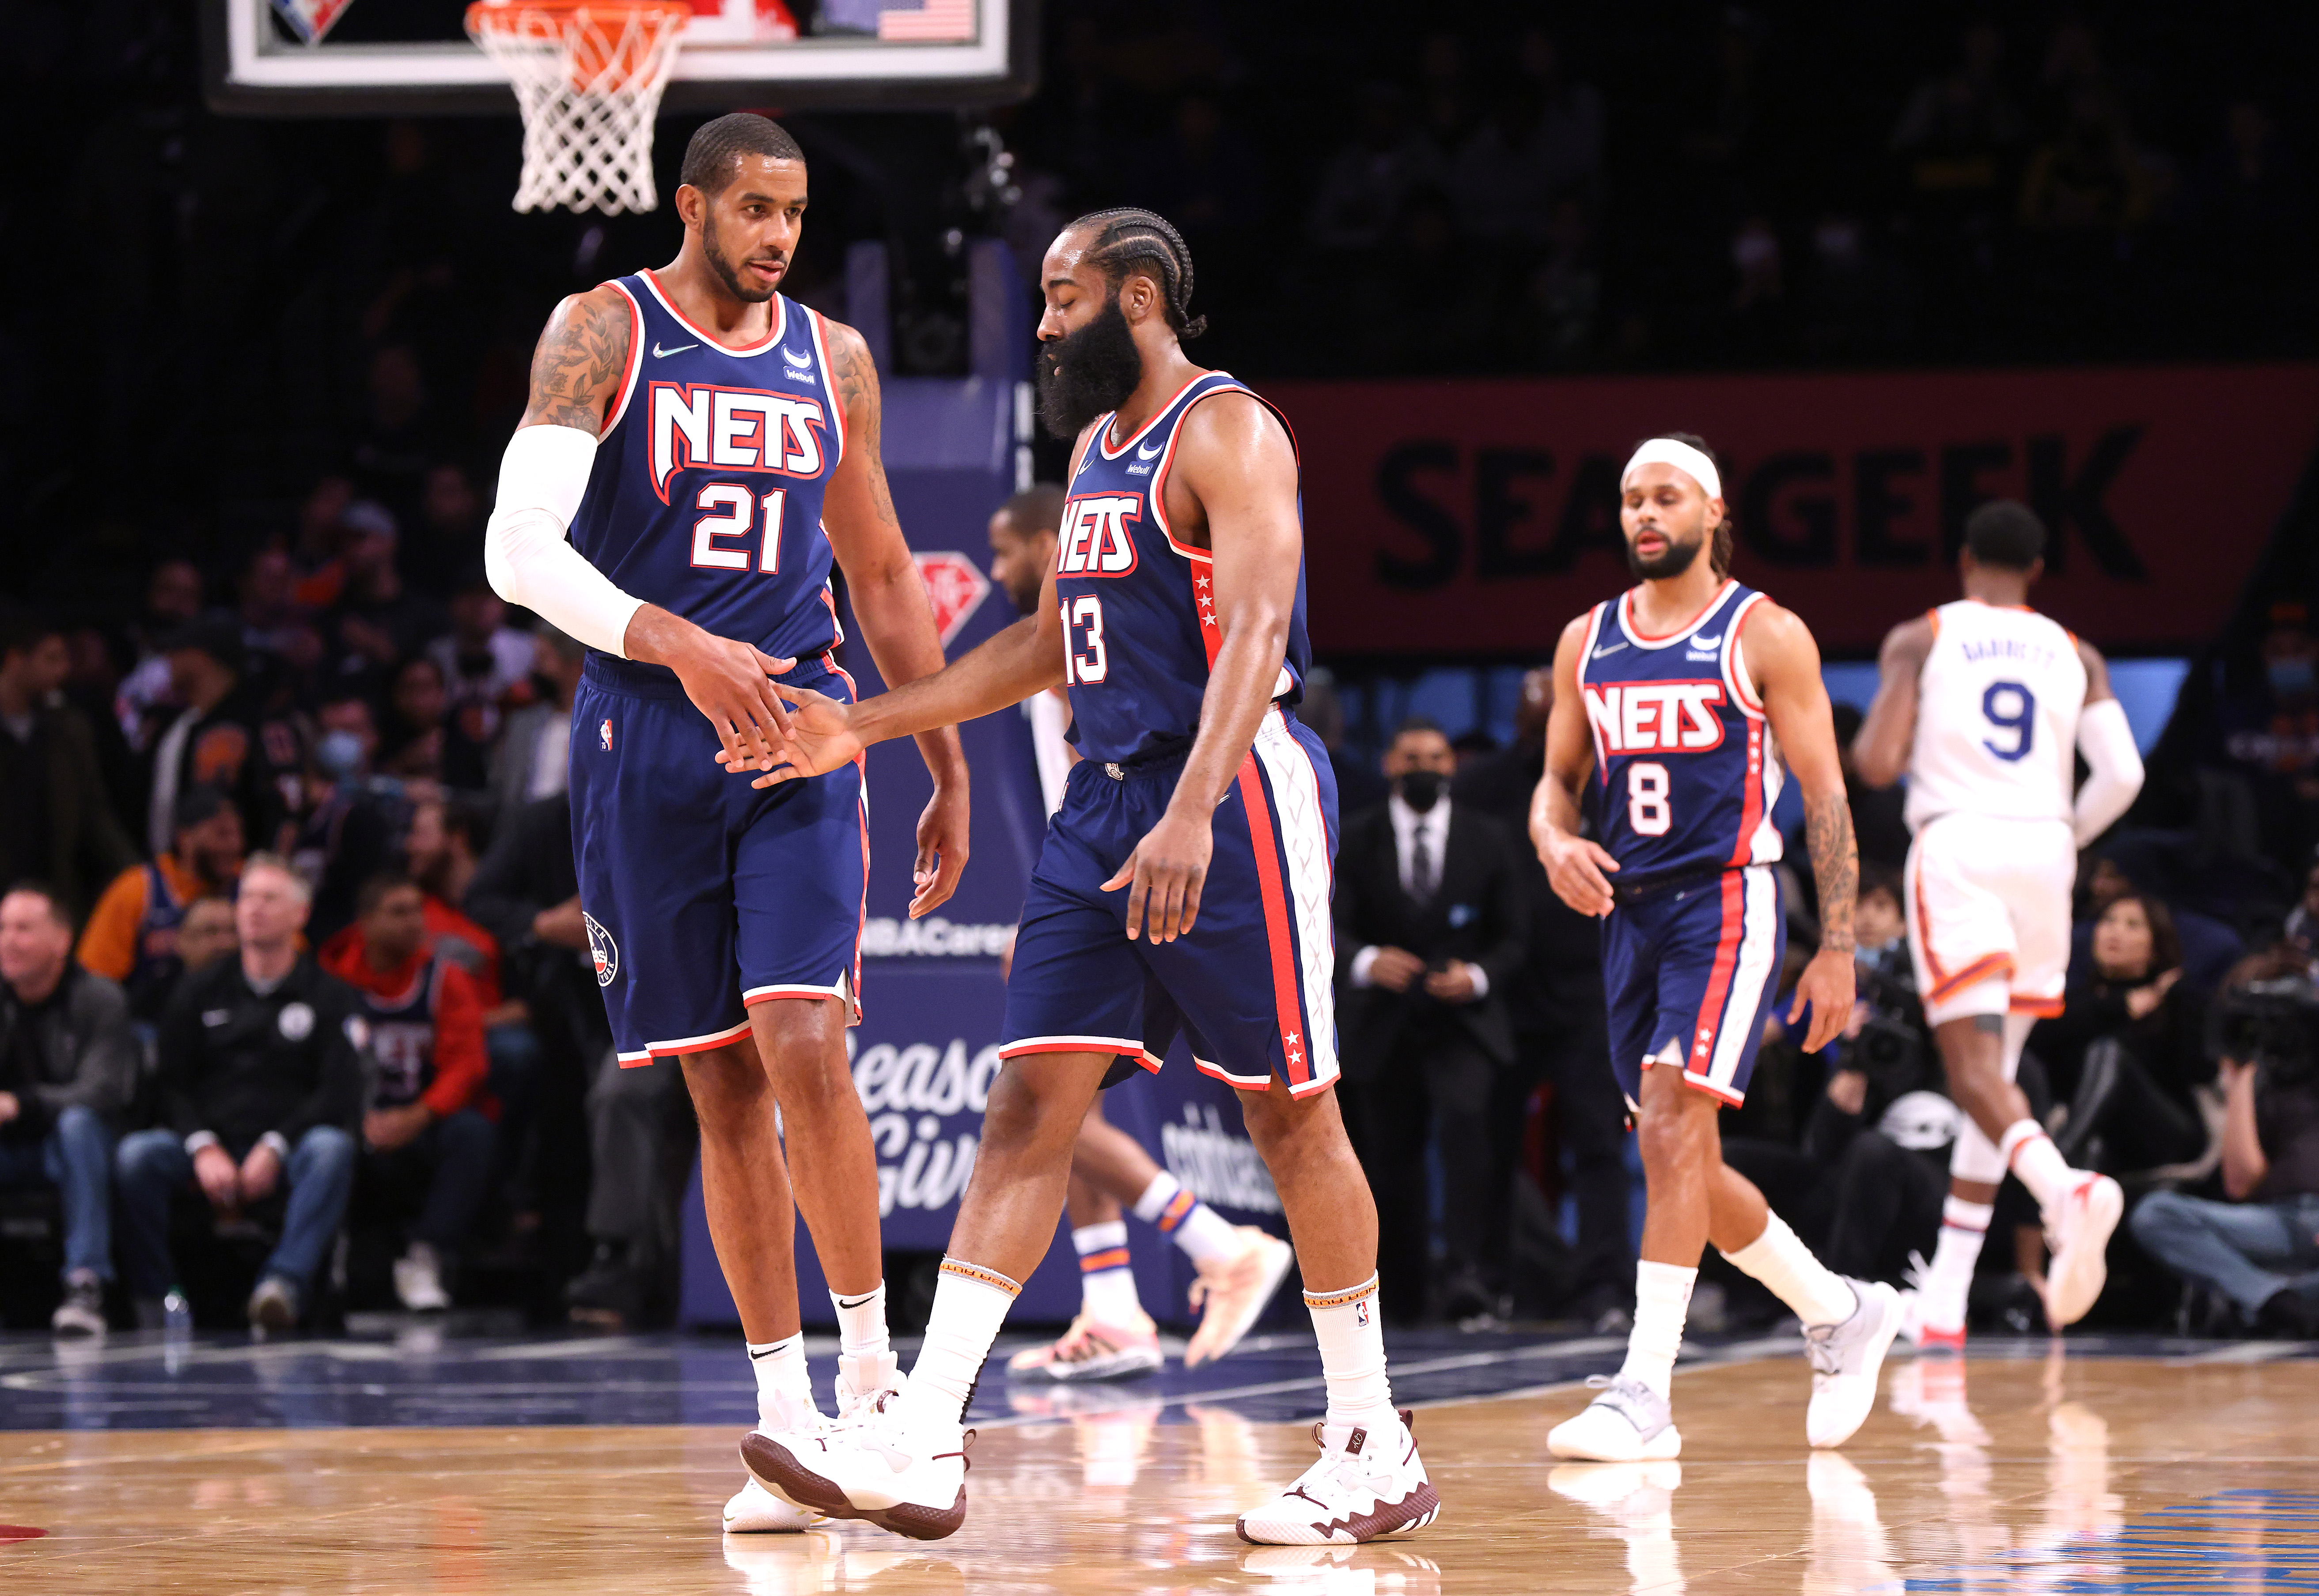 Nets center LaMarcus Aldridge greets guard James Harden after a shot during the first quarter of a game against the Knicks at Madison Square Garden on Nov. 30, 2021.